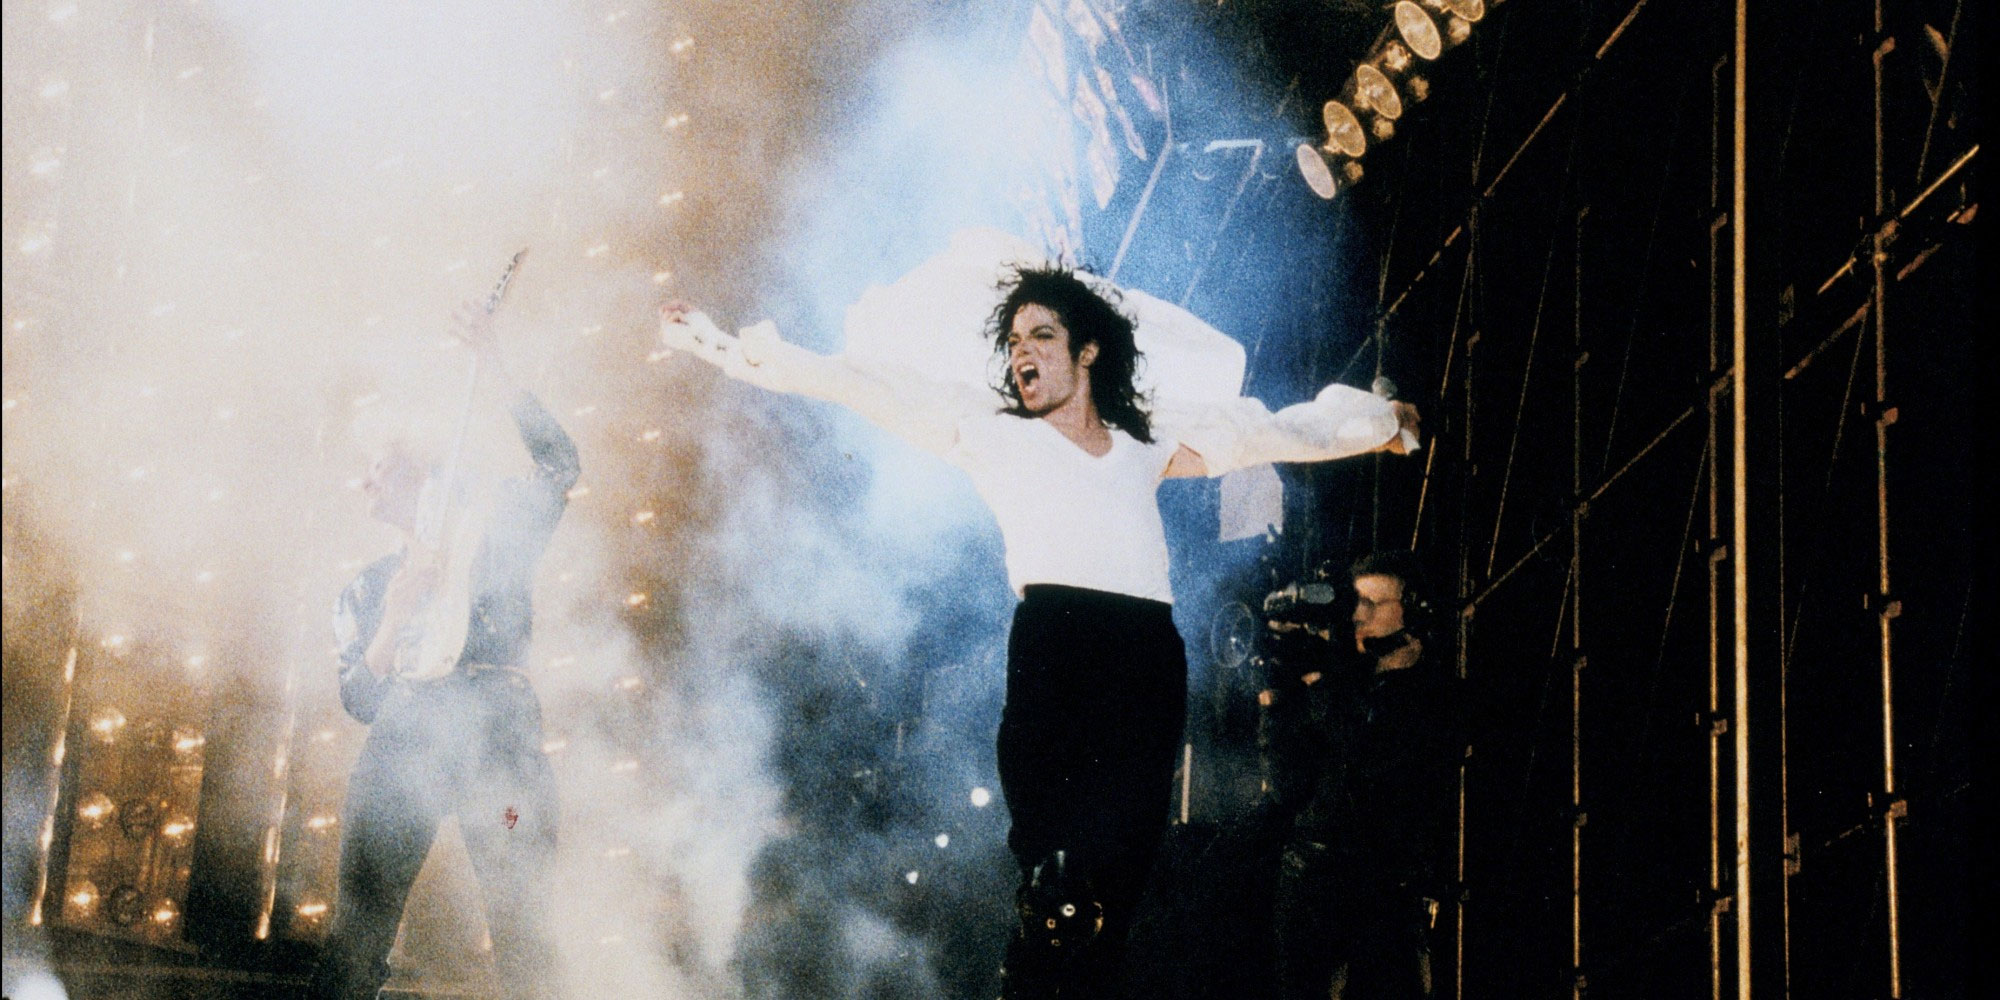 Michael on stage Bad Tour